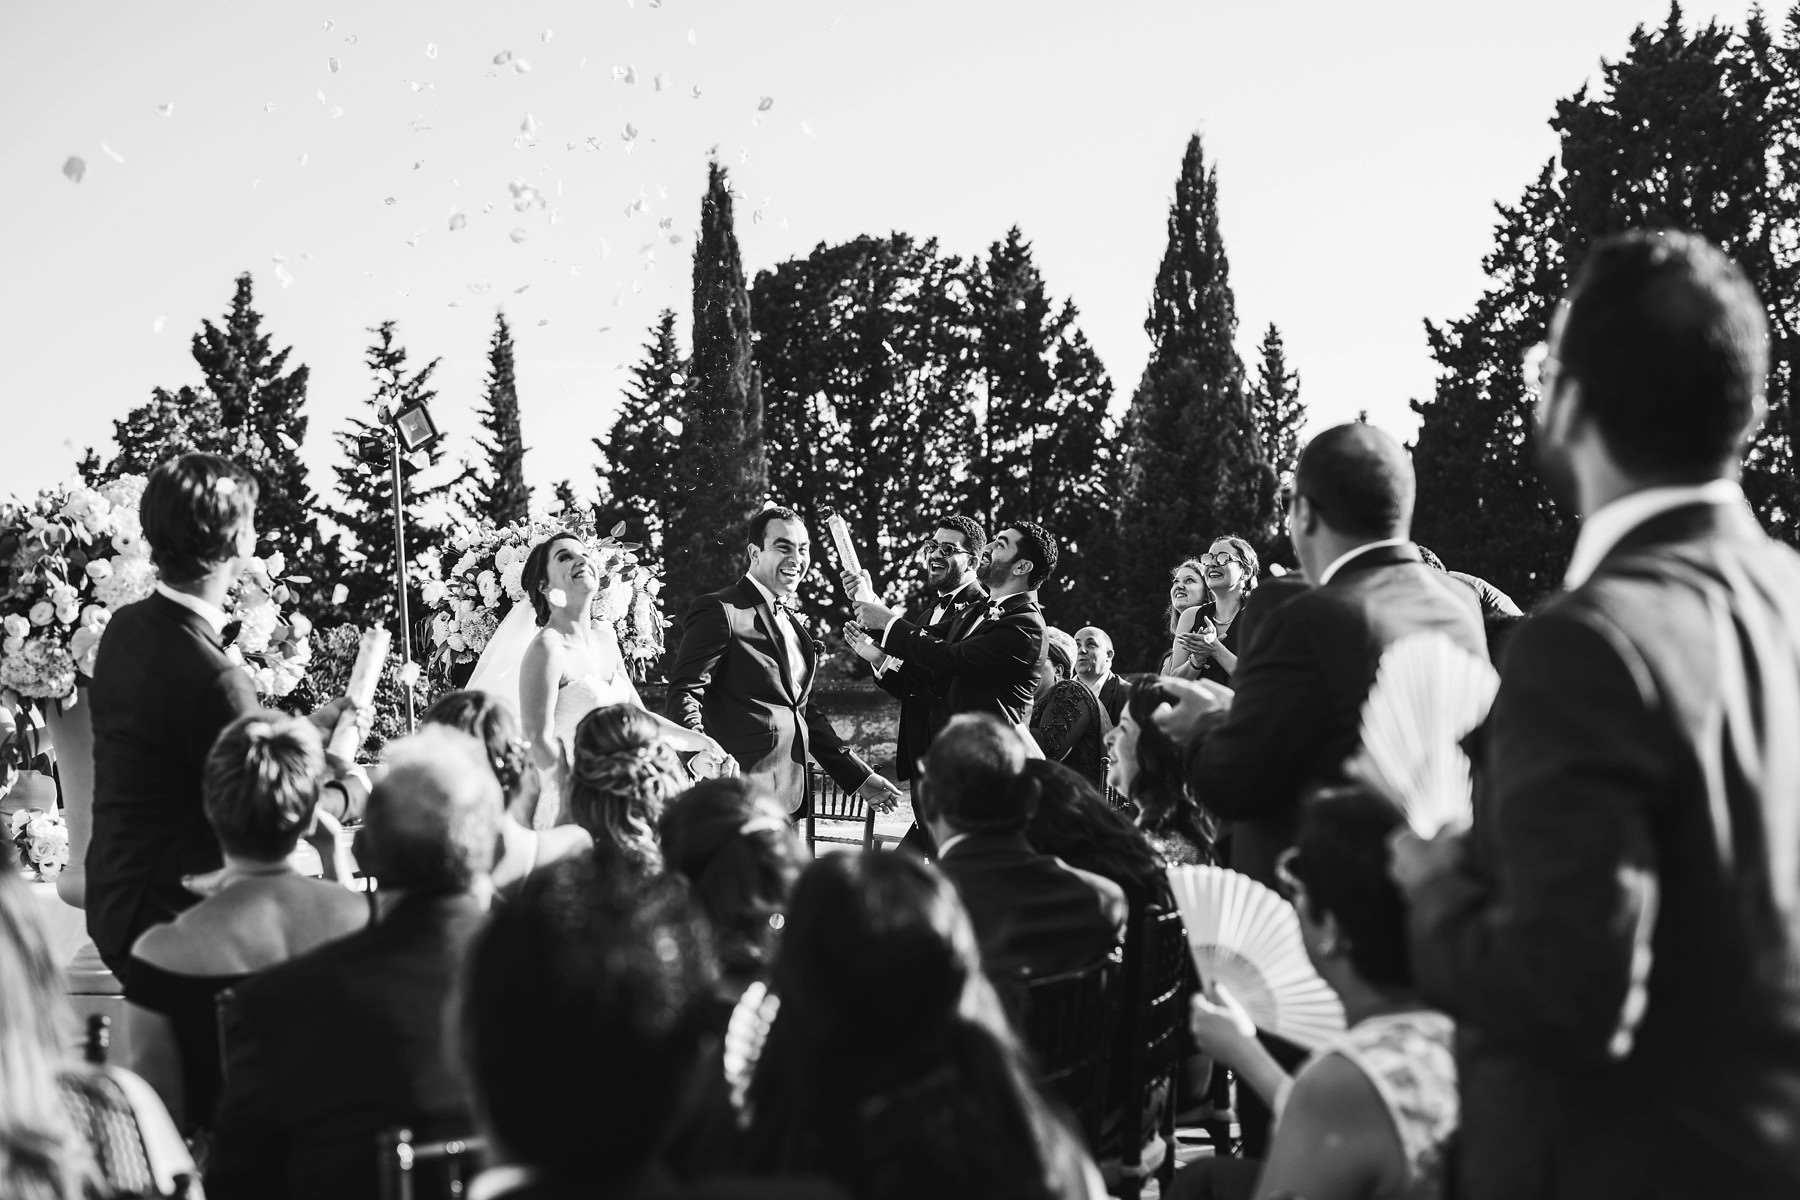 A destination wedding in Italy is a great way to make a special day even more unforgettable. Get inspired and take the extra step: your precious love deserves to be celebrated properly!